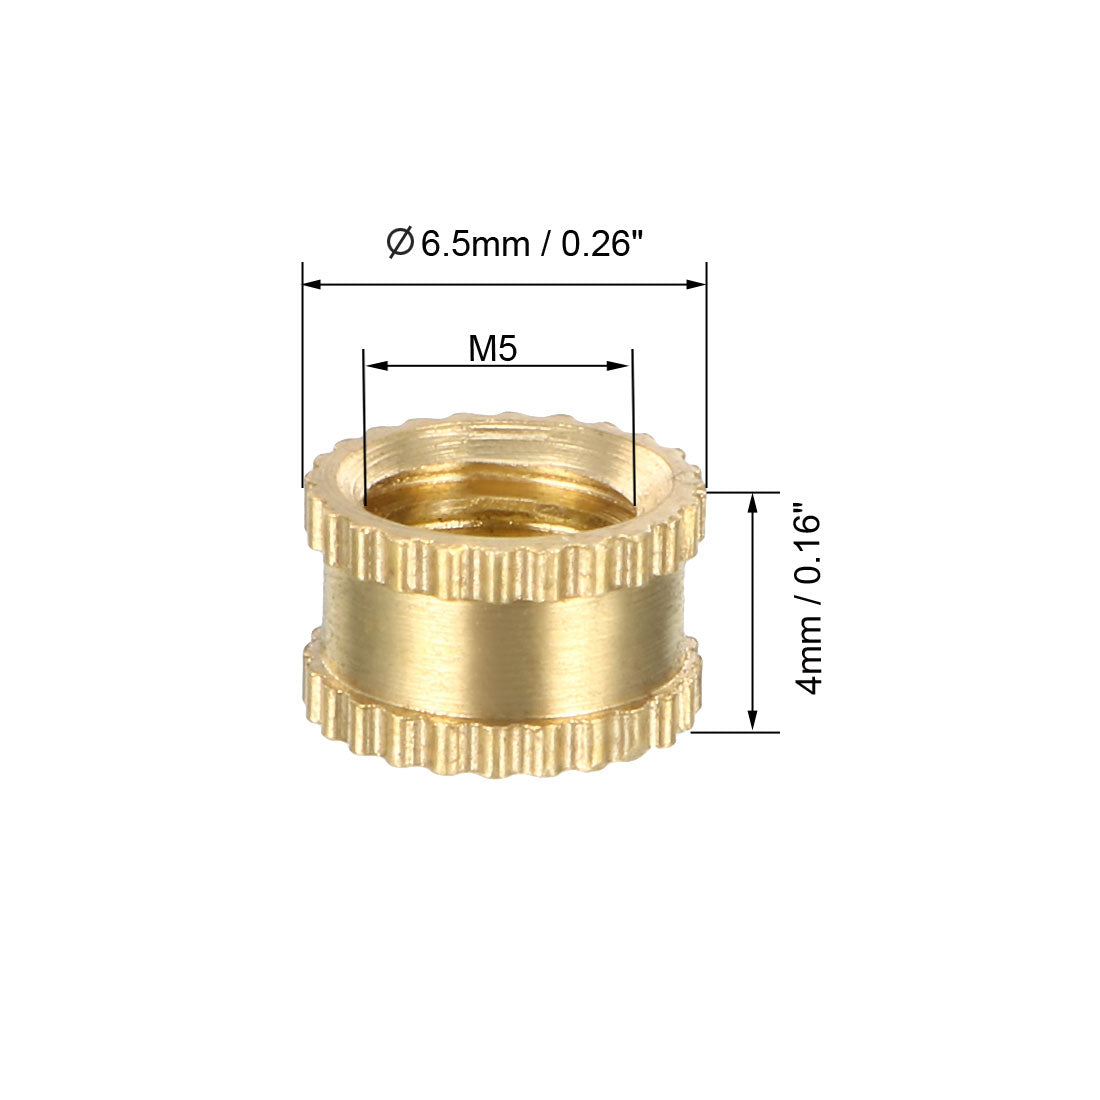 uxcell Uxcell Knurled Insert Nuts - Brass Threaded Insert Embedment Nut for 3D Printer